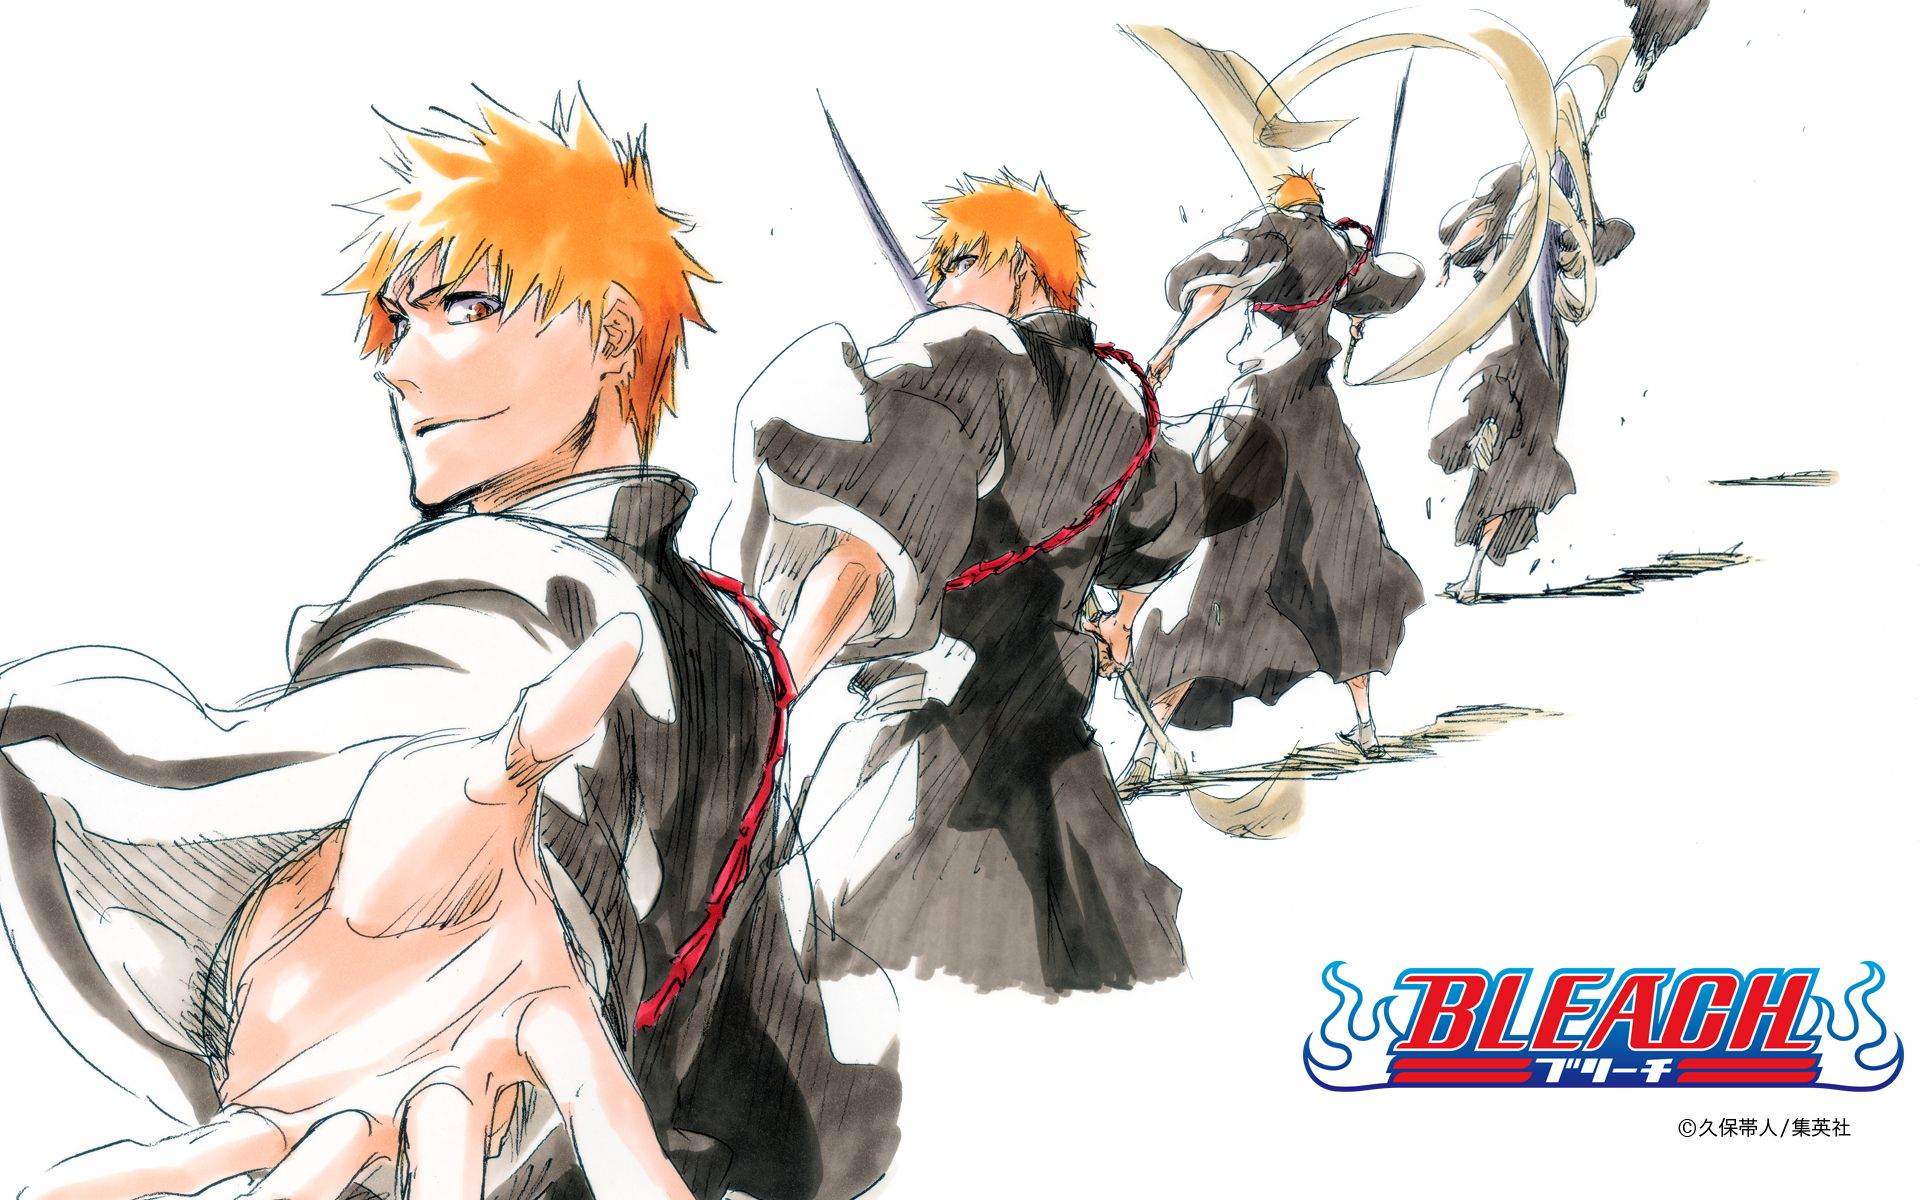 Theres a New BLEACH Anime Series in Development Heres What We Know   GeekTyrant